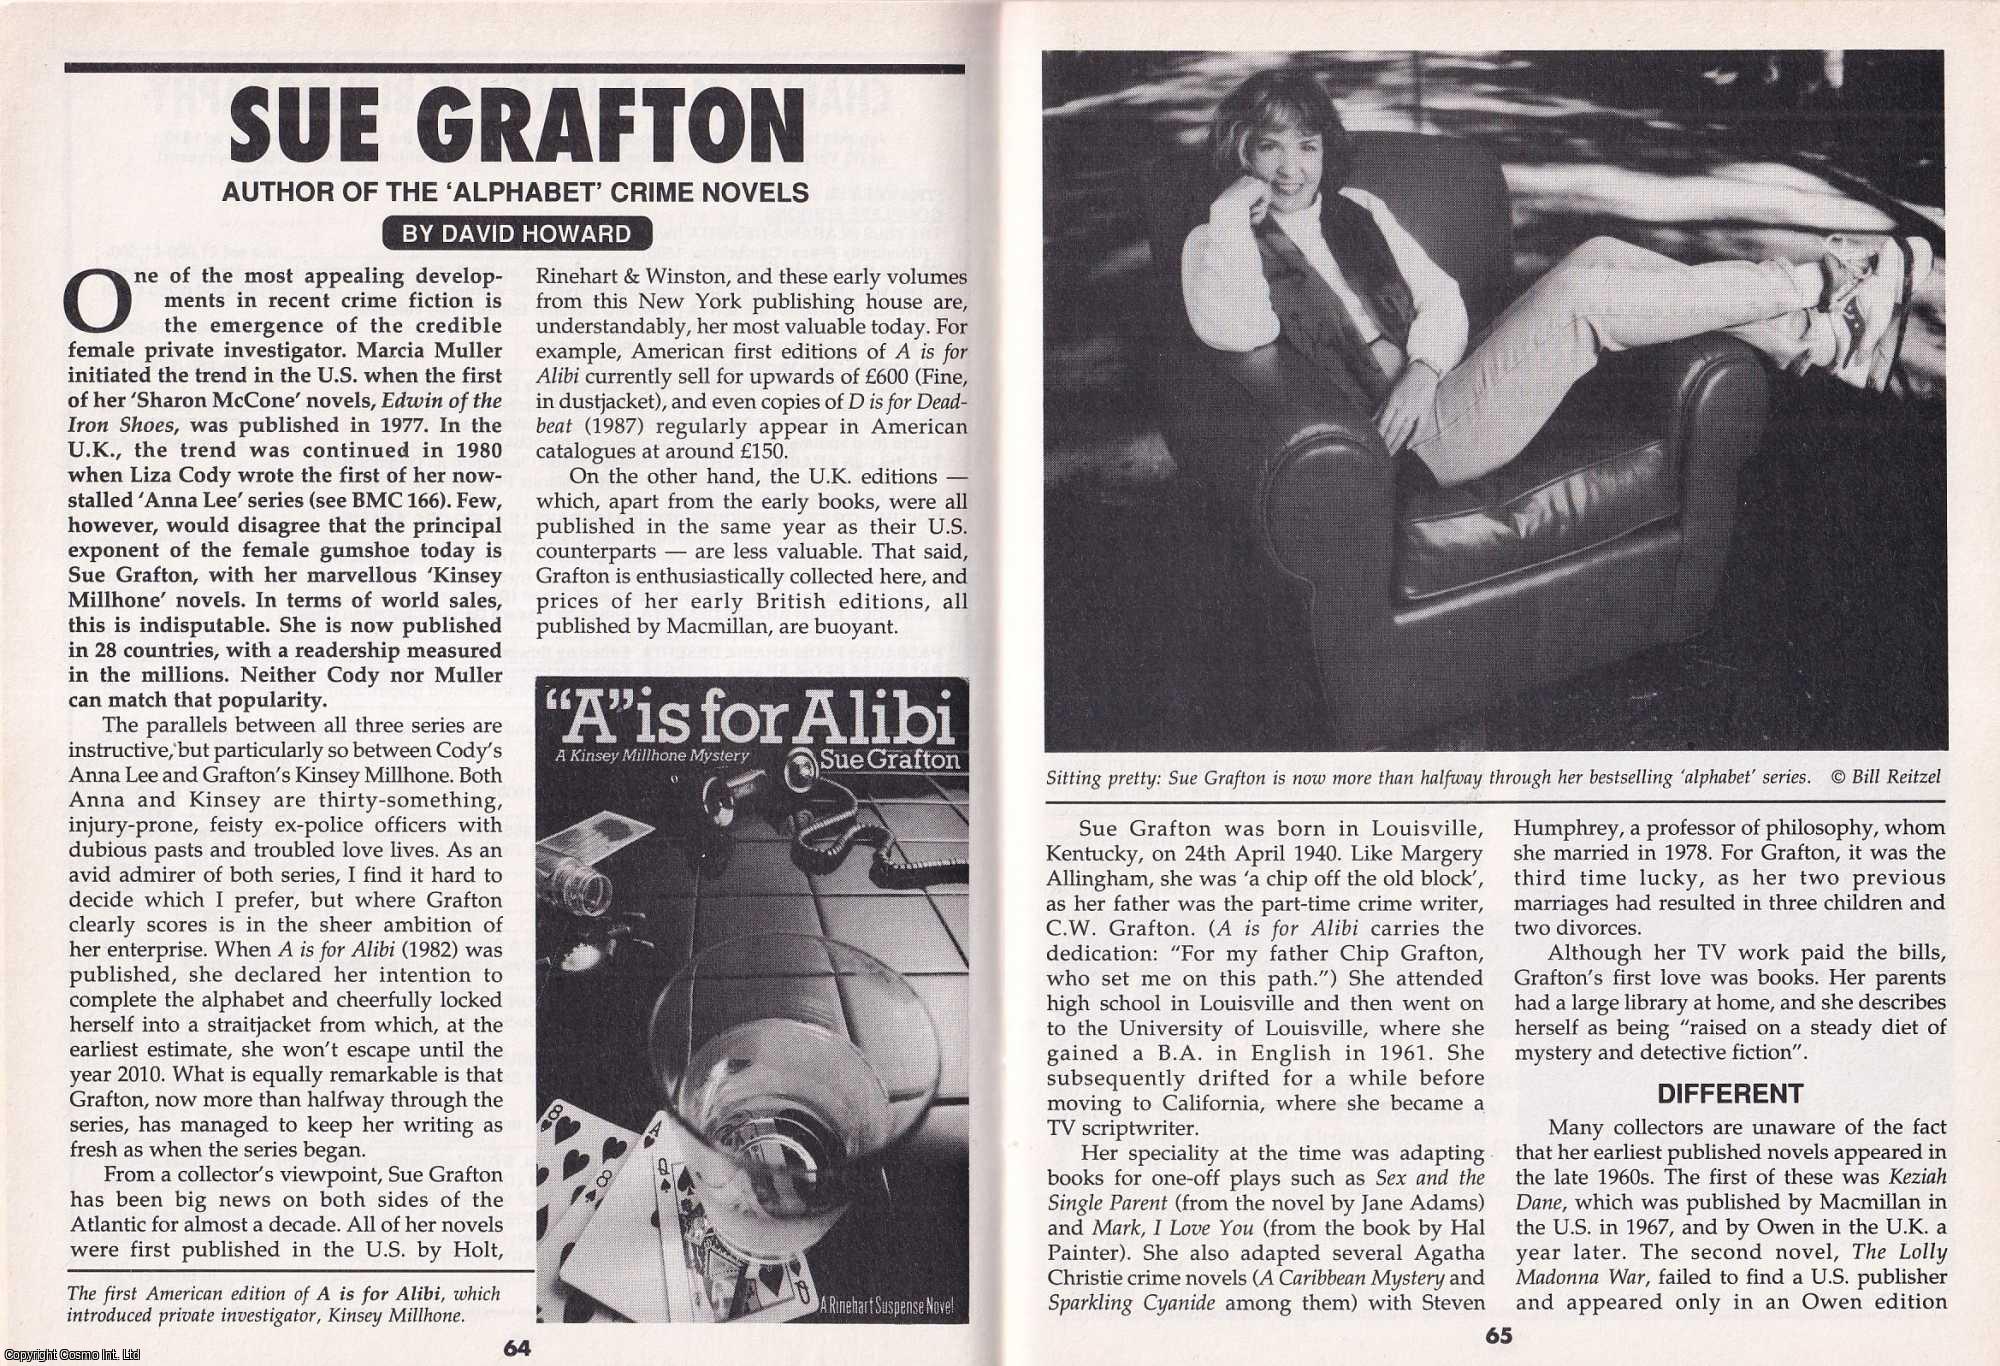 David Howard - Sue Grafton. Author of The Alphabet Crime Novels. This is an original article separated from an issue of The Book & Magazine Collector publication, 1999.